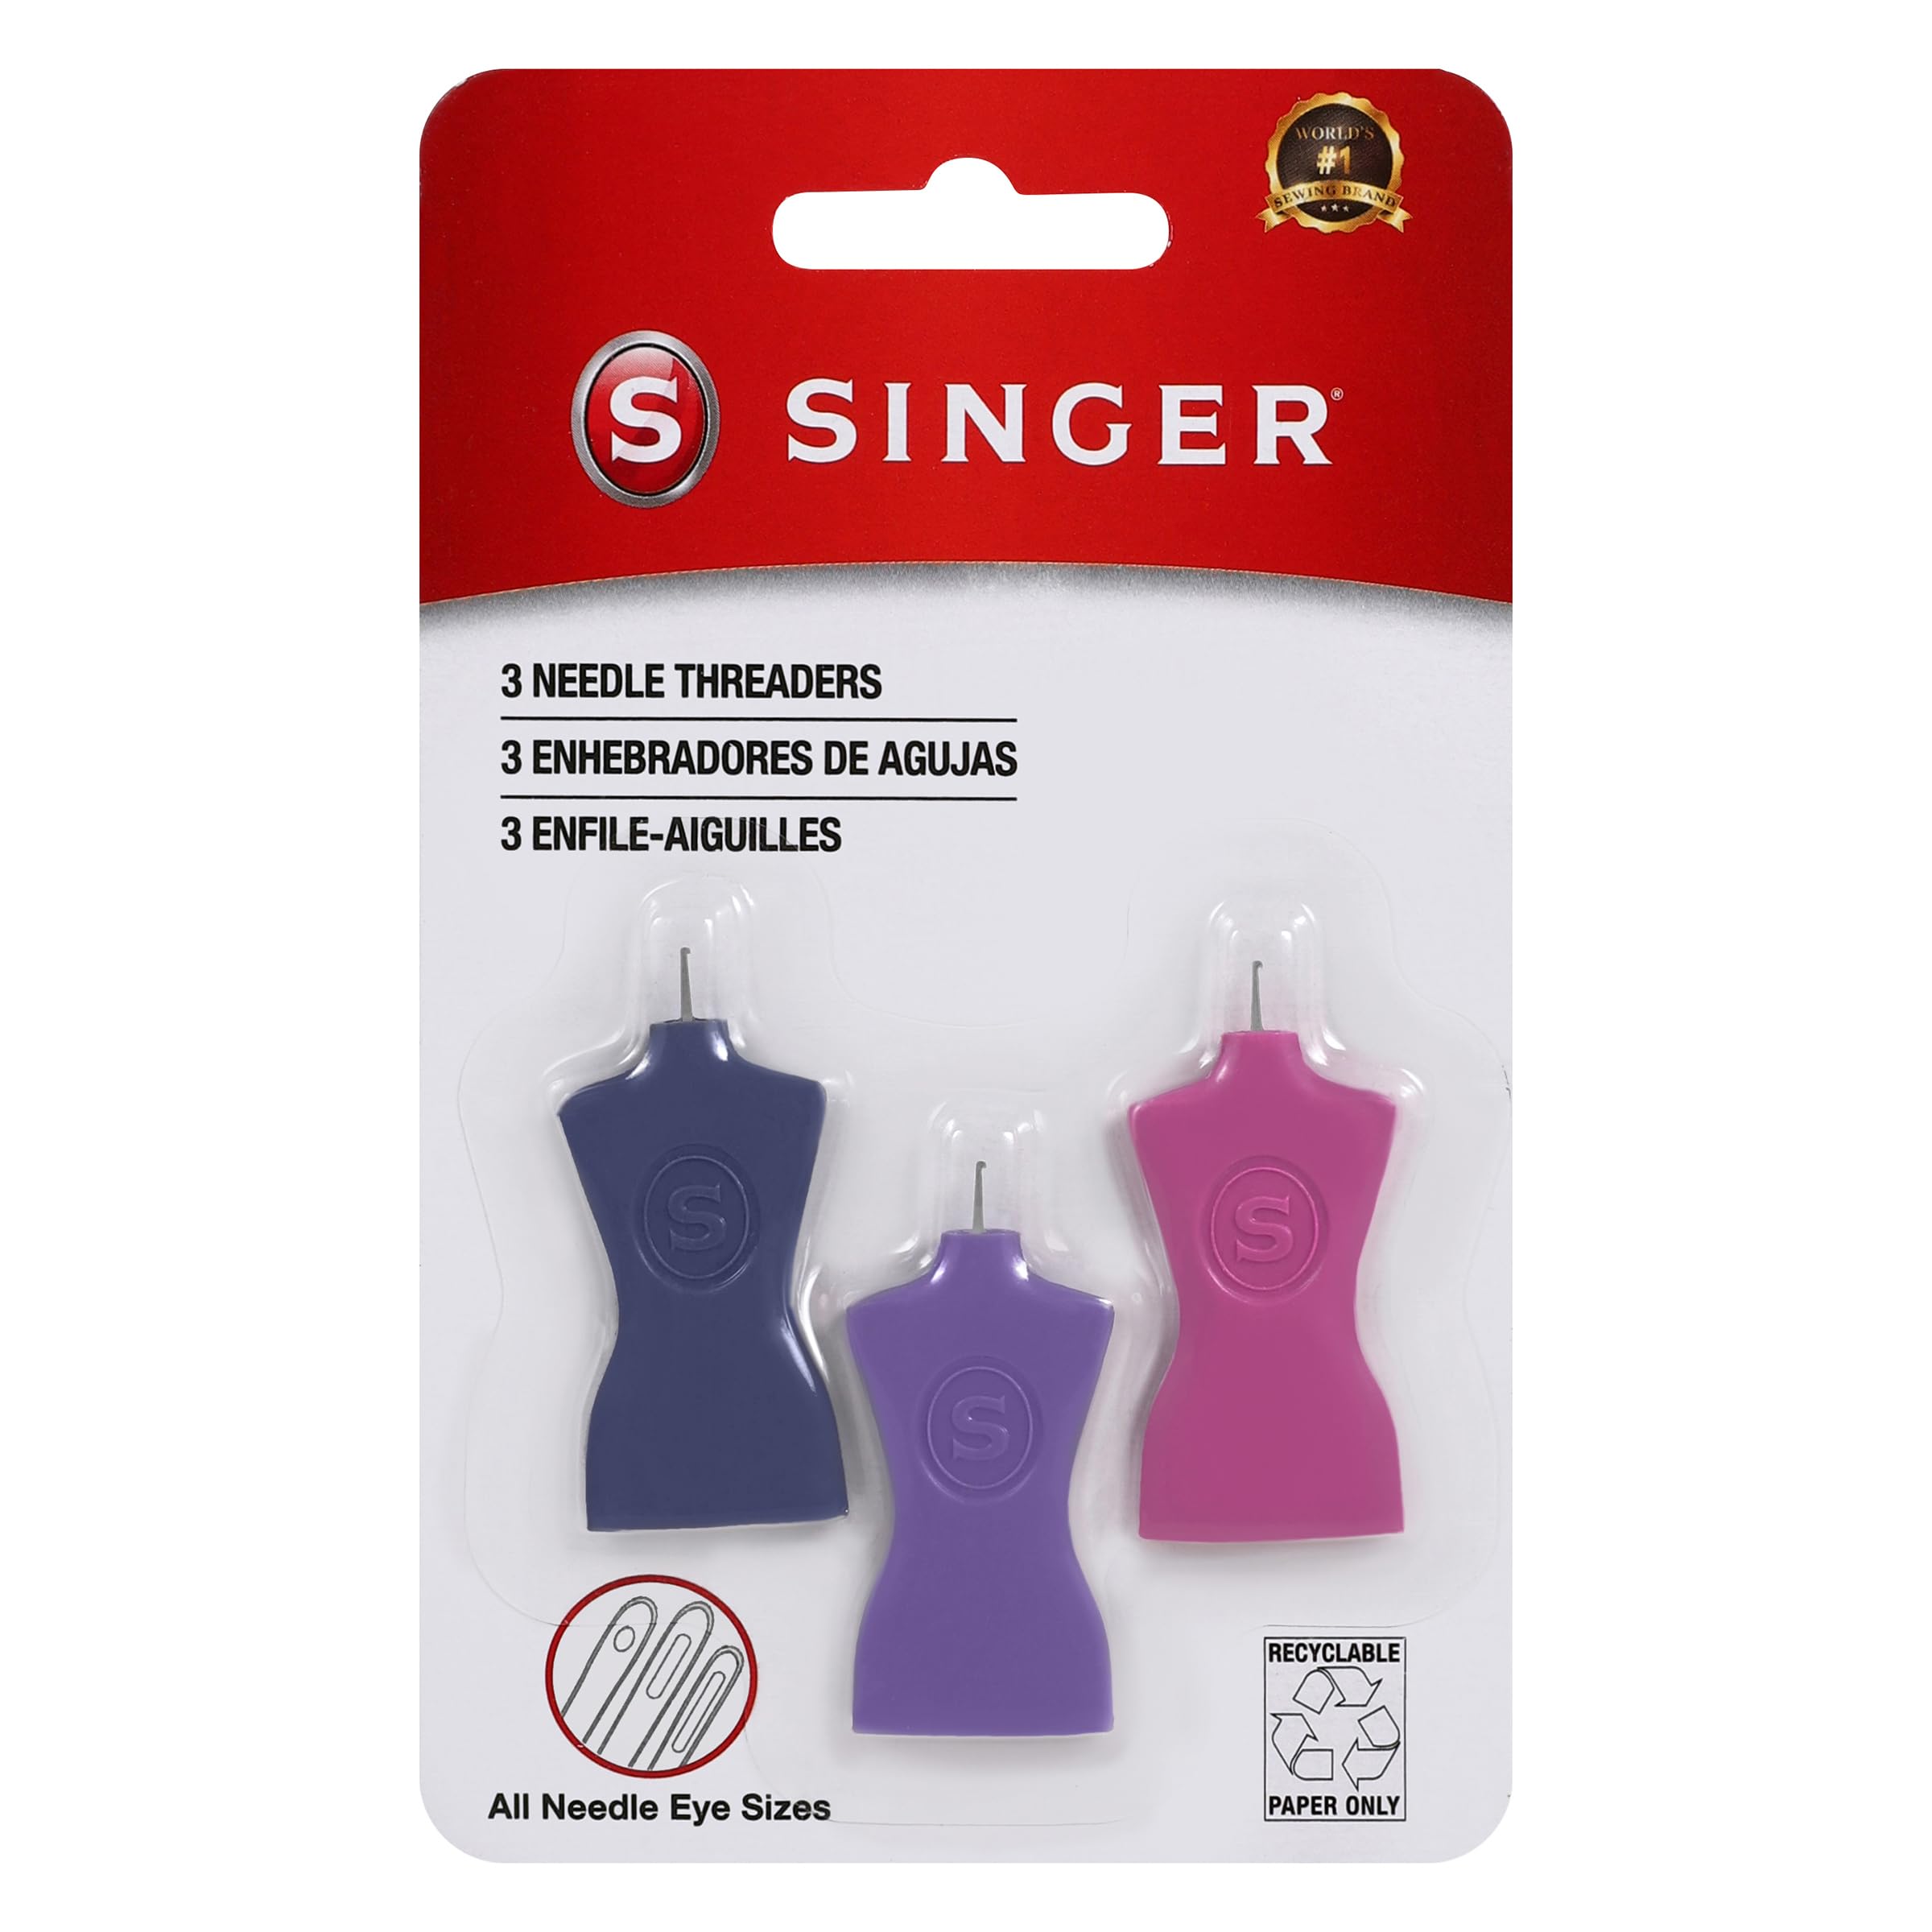 SINGER Hook Eye Needle Threaders, Set of 3 - Versatile & Easy Threader for Hand & Machine Sewing – Assorted Colors – Ideal for Clothes Mending, Embroidery & Essential Sewing Supplies